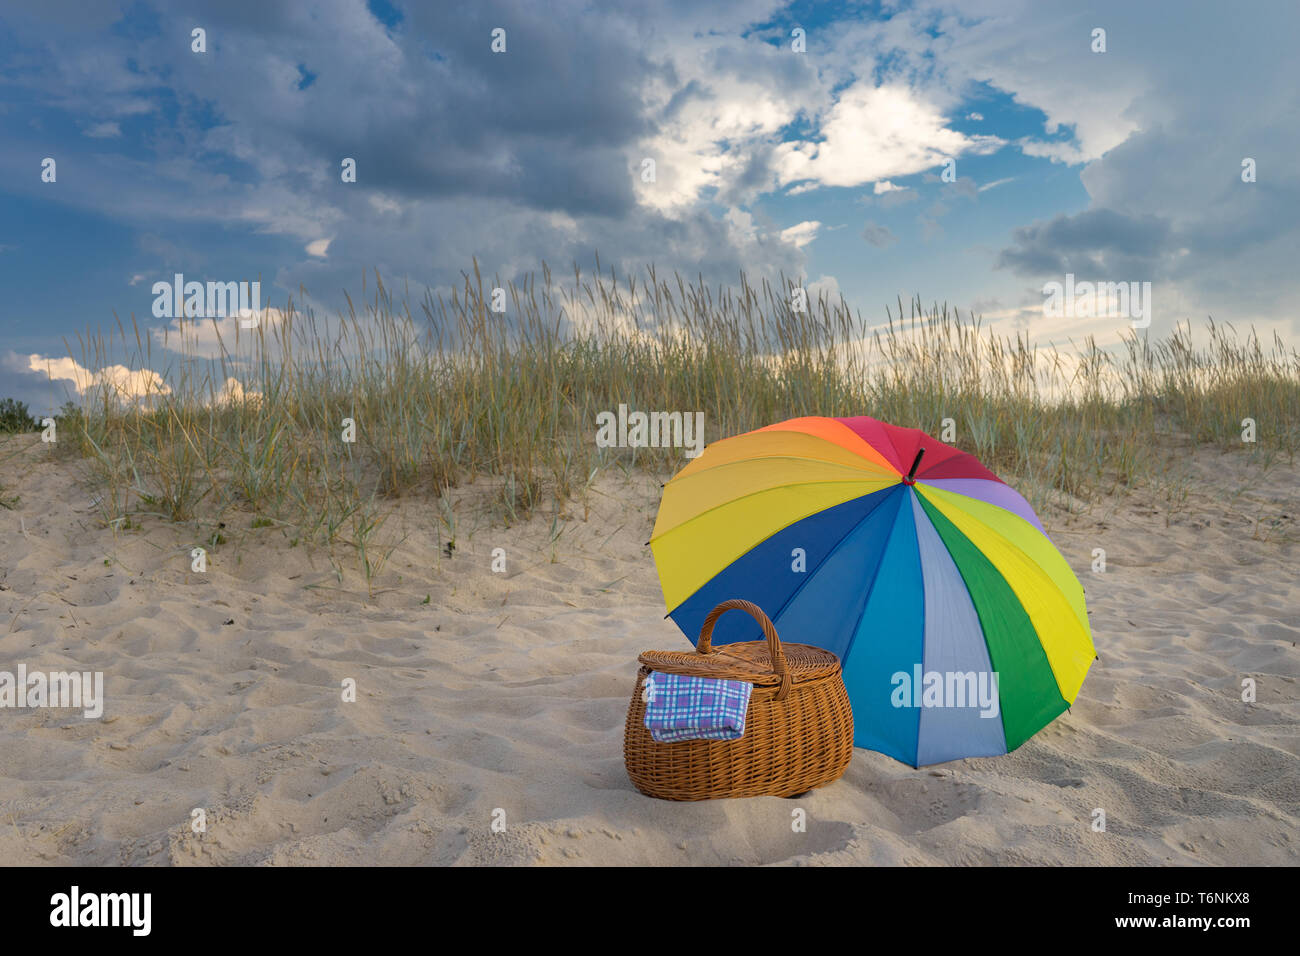 Multicolored umbrella and picnic basket against wild beach and clouds, weekend break concept Stock Photo